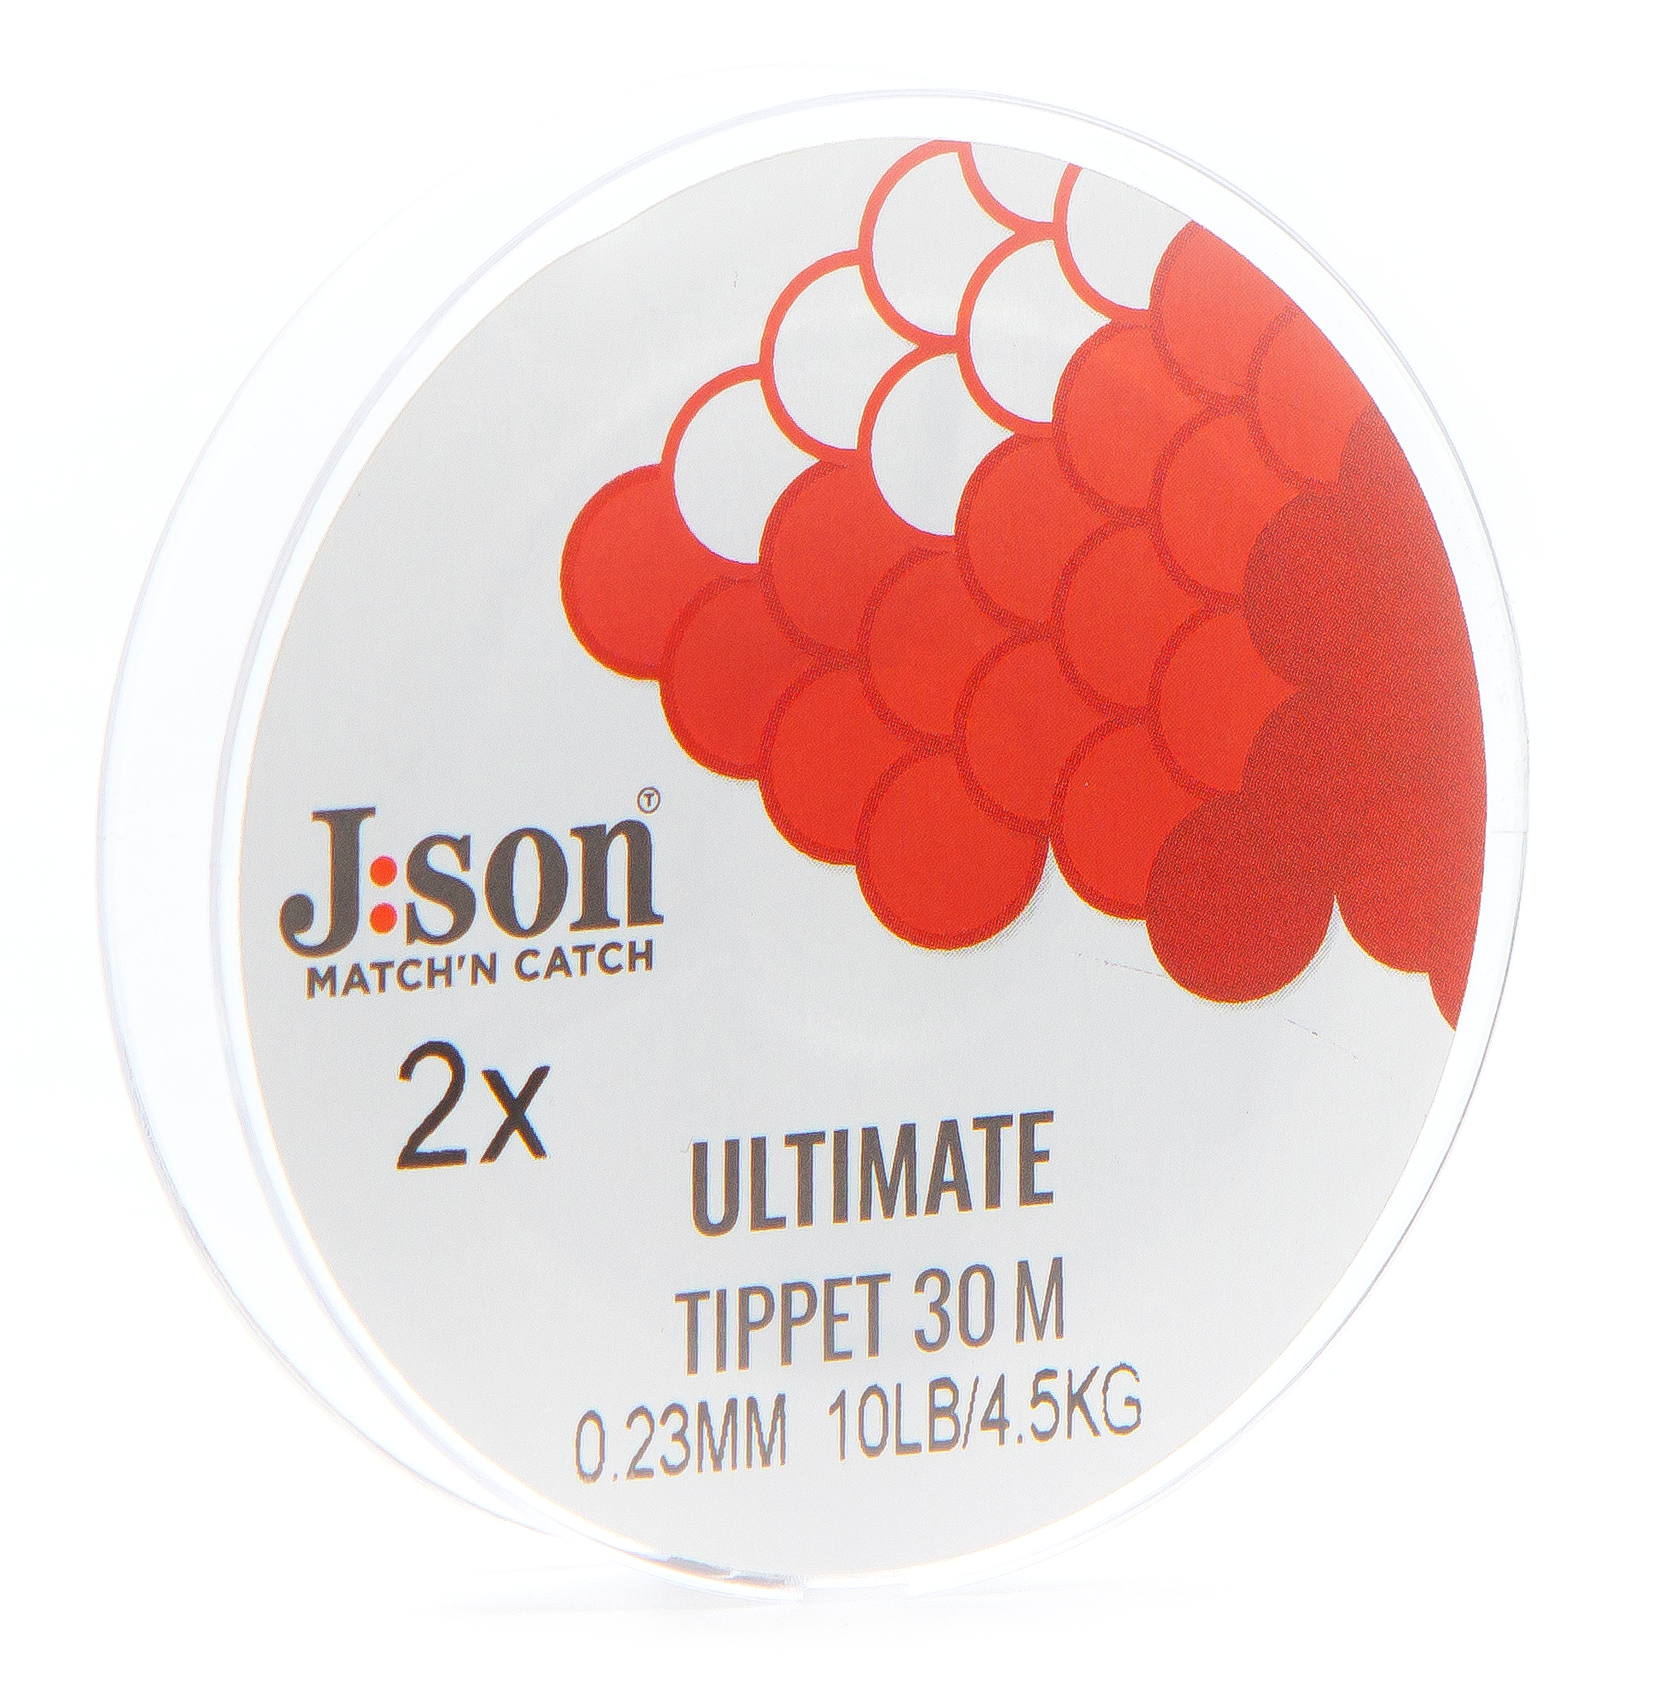 Json Ultimate Tippet 30 m 1X| 0.26mm